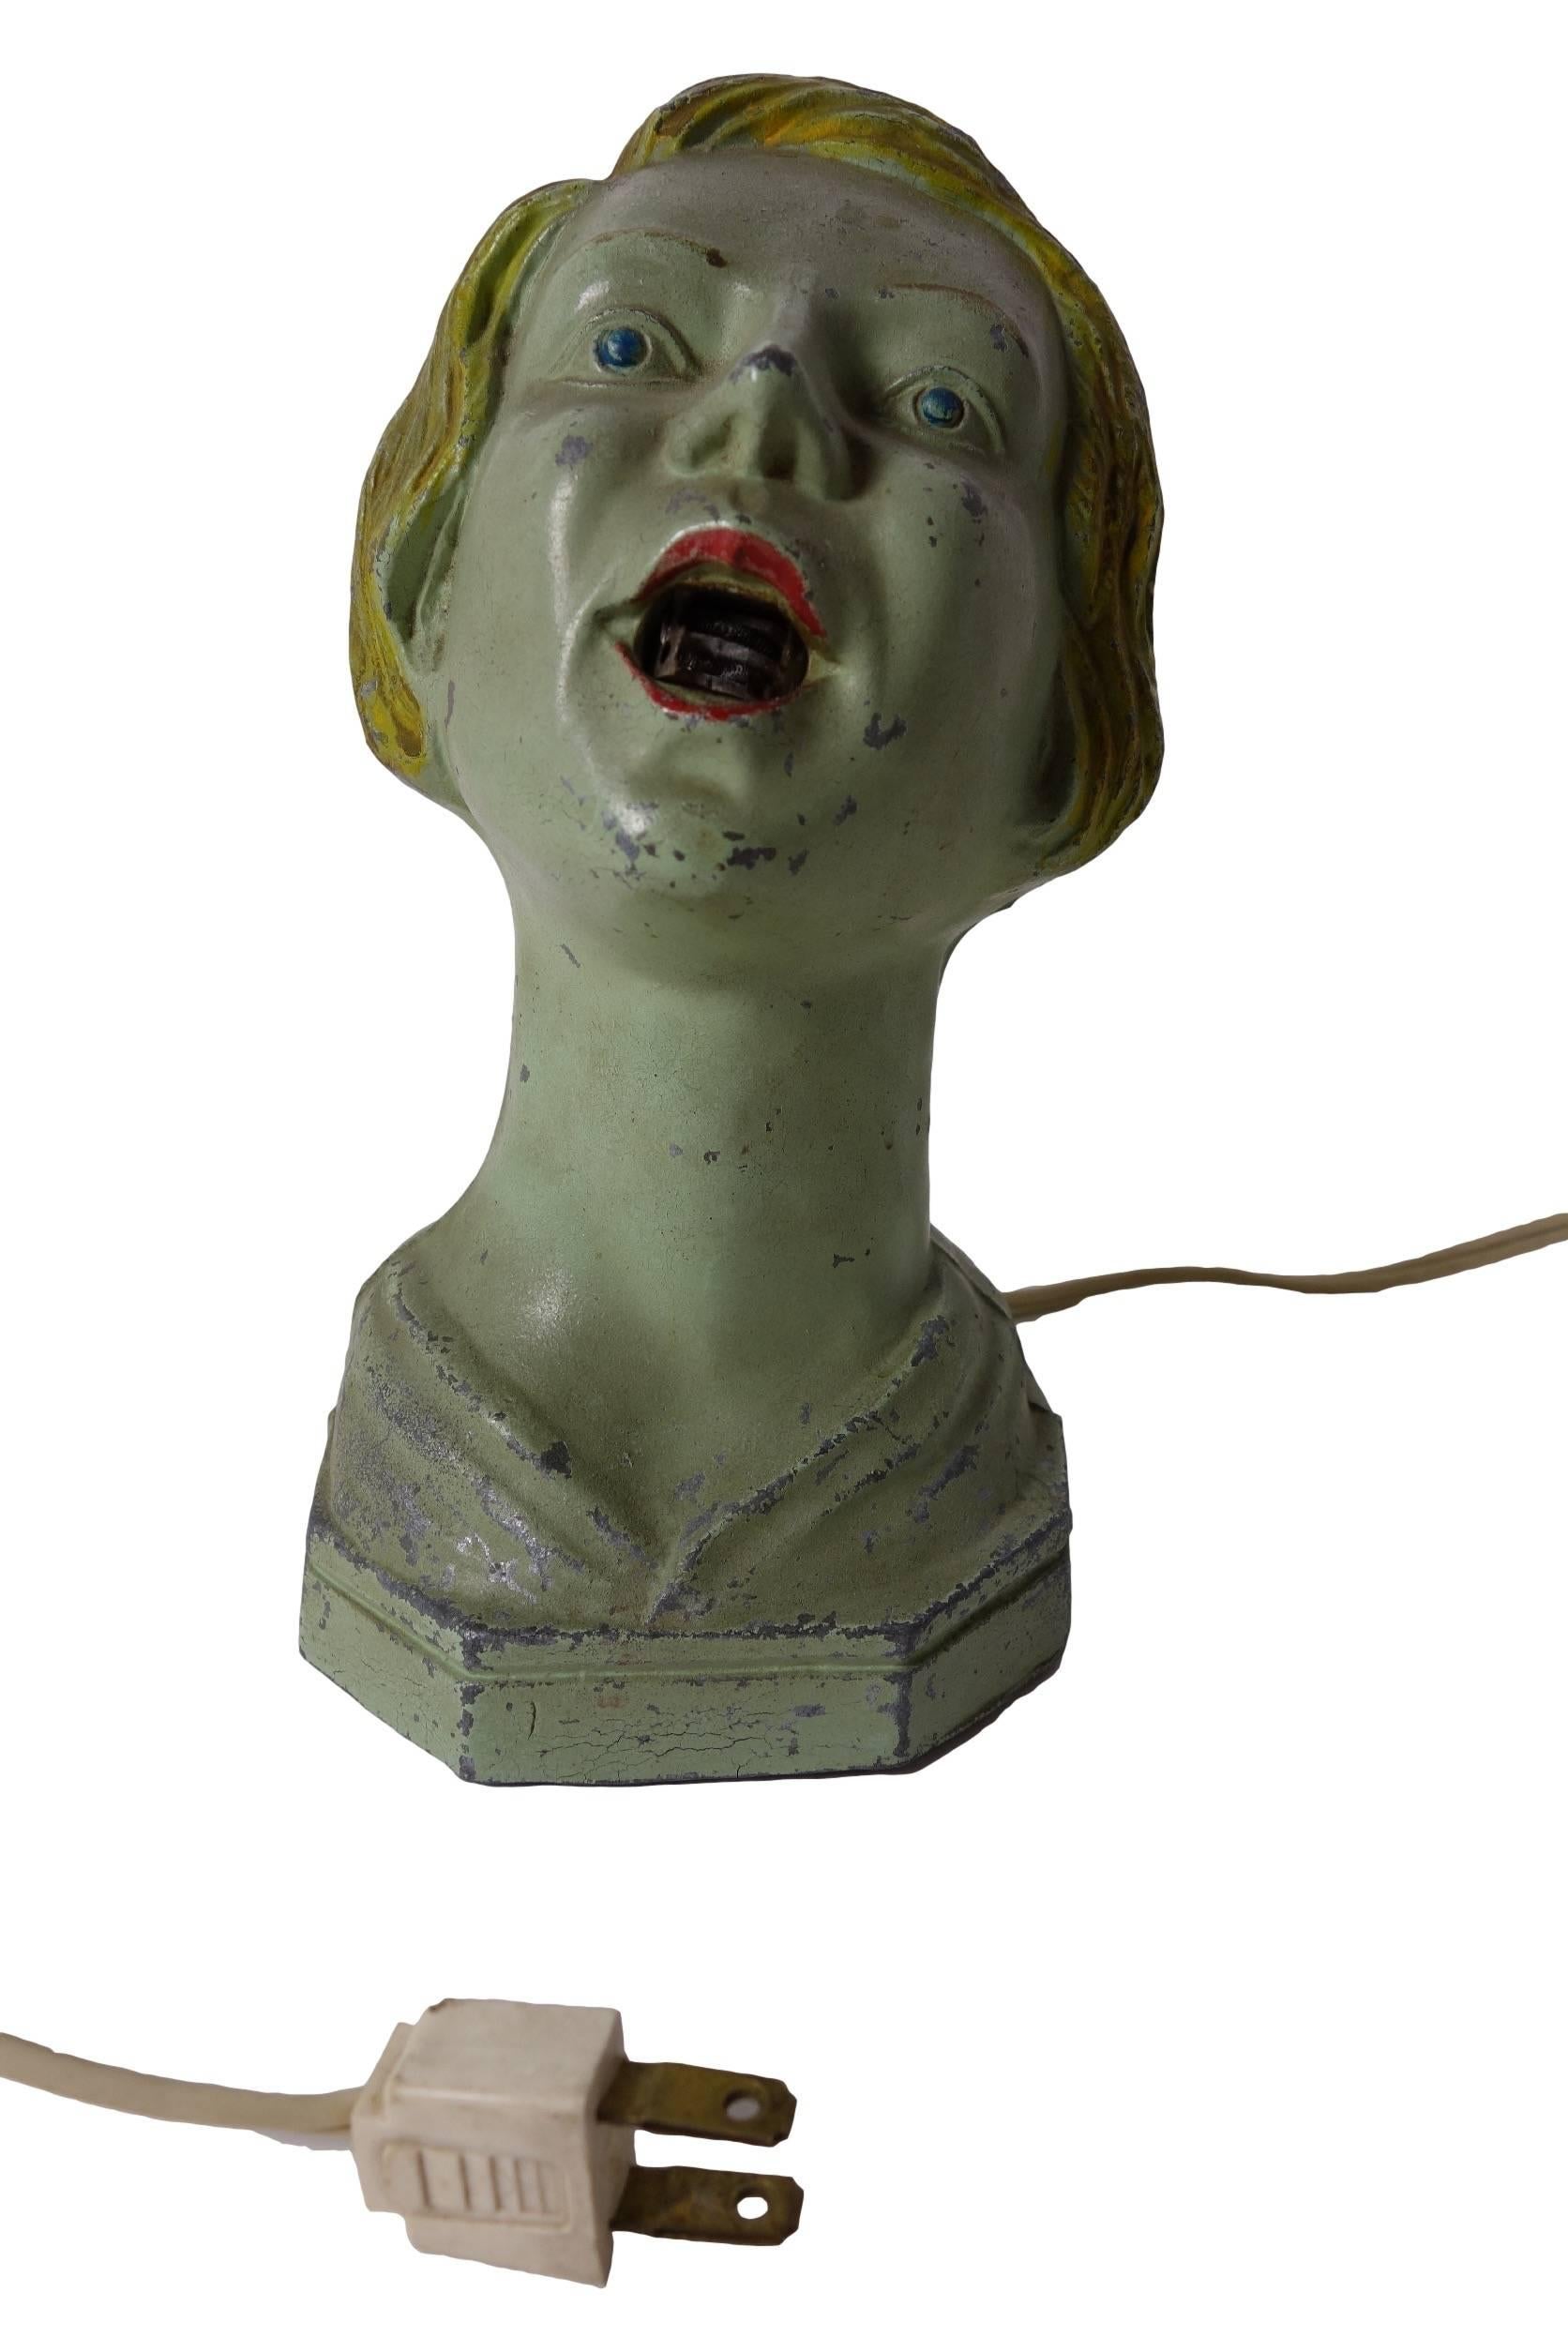 This table cigarette lighter by Arturo Levi is an Art Deco piece from the Frankart era and is certainly a conversation starter.  She has her original paint and is made of cast spelter.  On the inside of her mouth is an electric heating element that